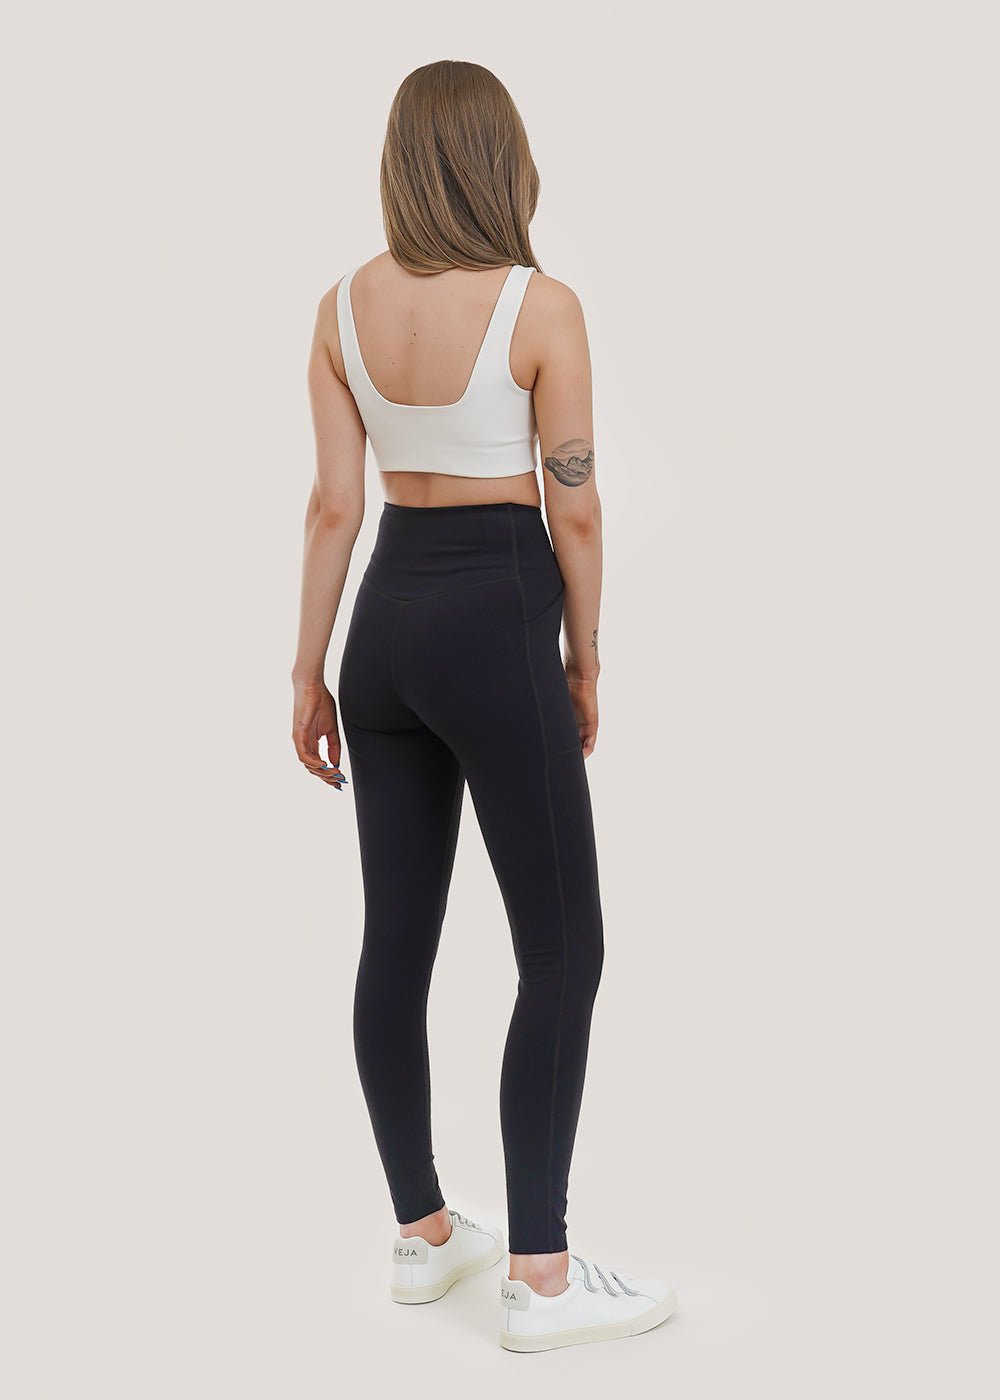 Black High Rise Pocket Legging by GIRLFRIEND COLLECTIVE – New